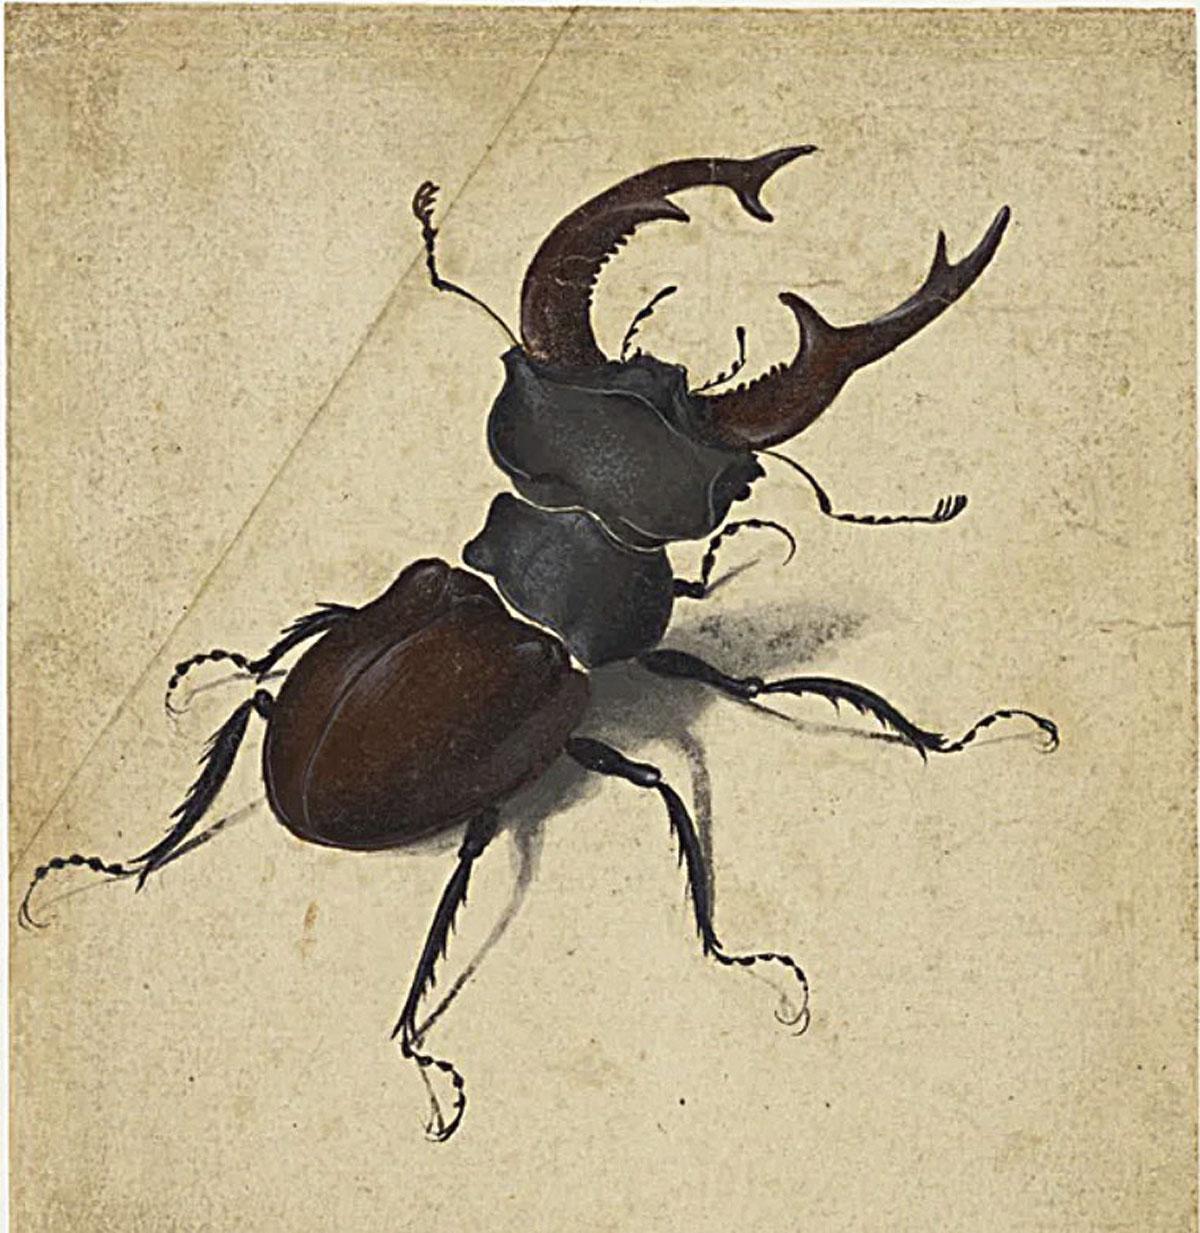 Albrecht Dürer also made detailed drawings of the smallest creatures, such as this stag beetle (1505).